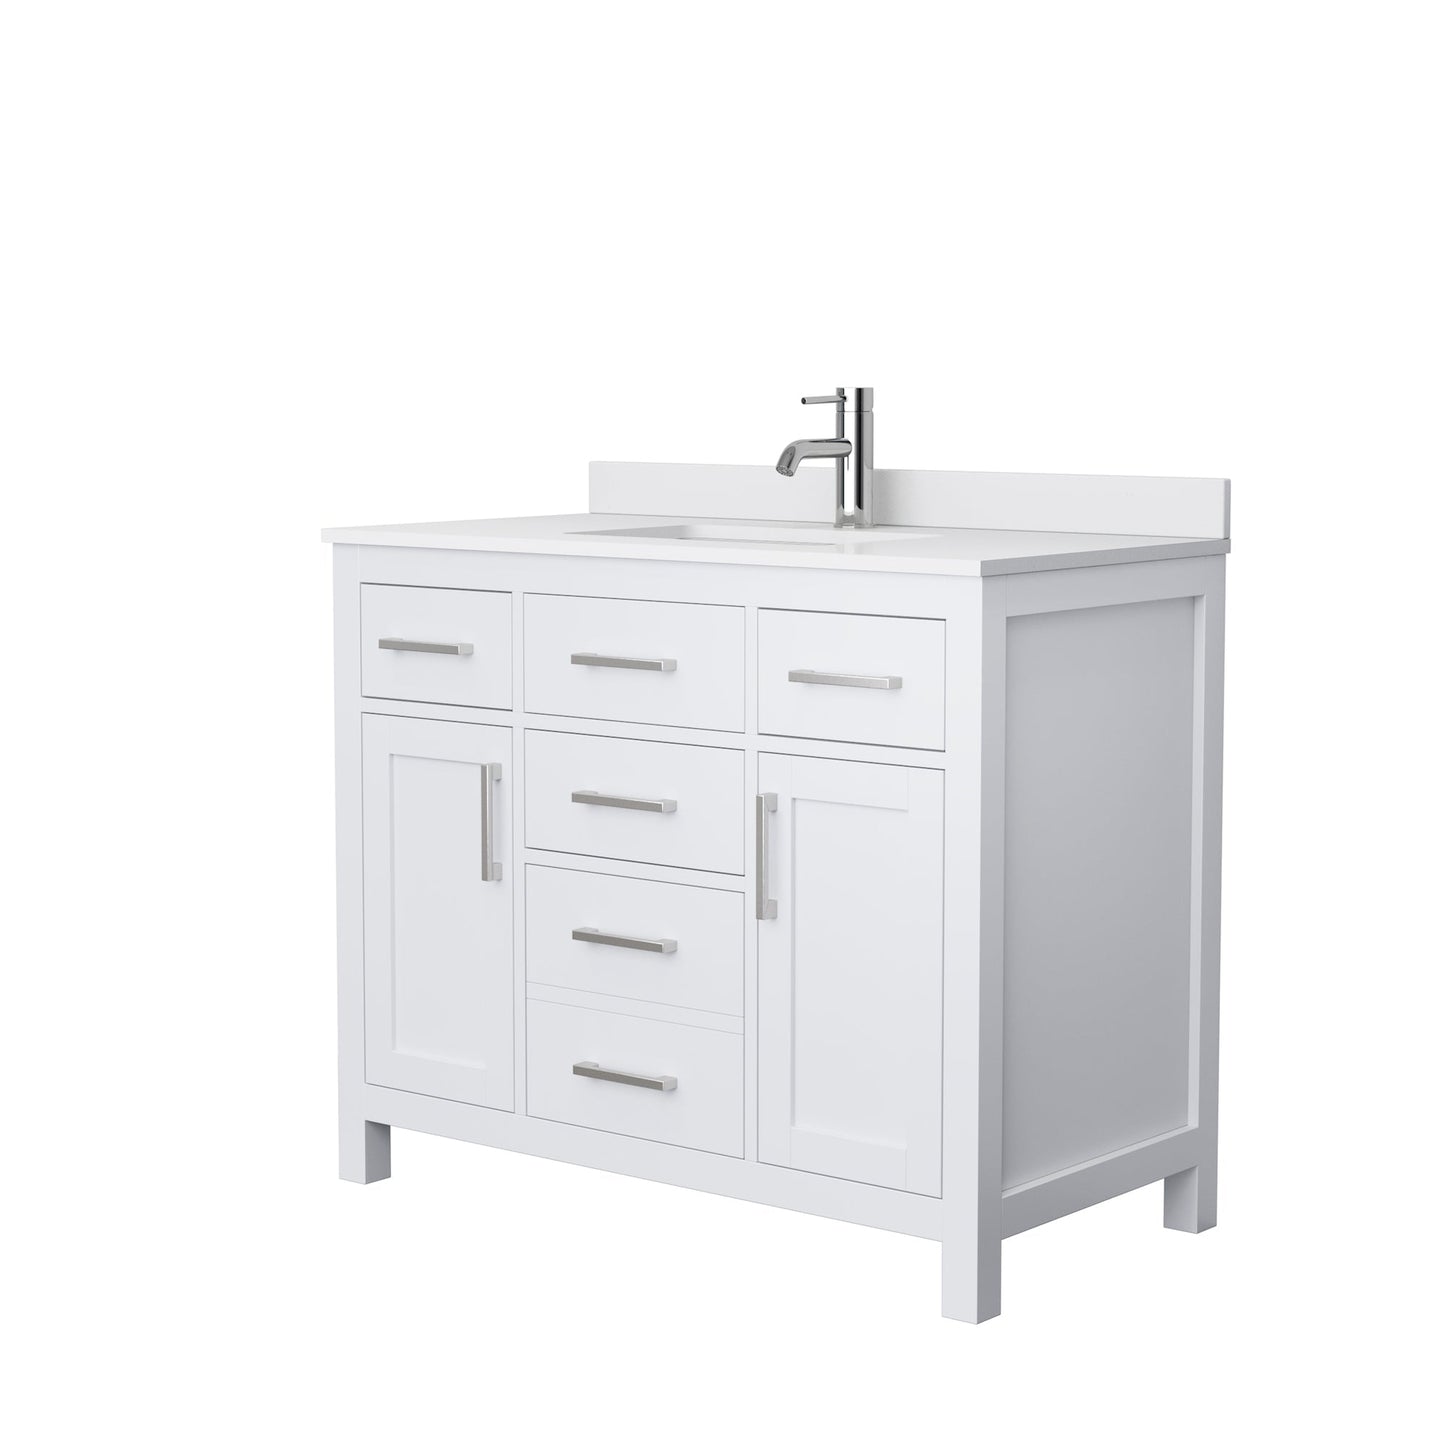 Wyndham Collection Beckett 42" Single Bathroom White Vanity With White Cultured Marble Countertop, Undermount Square Sink And Brushed Nickel Trim